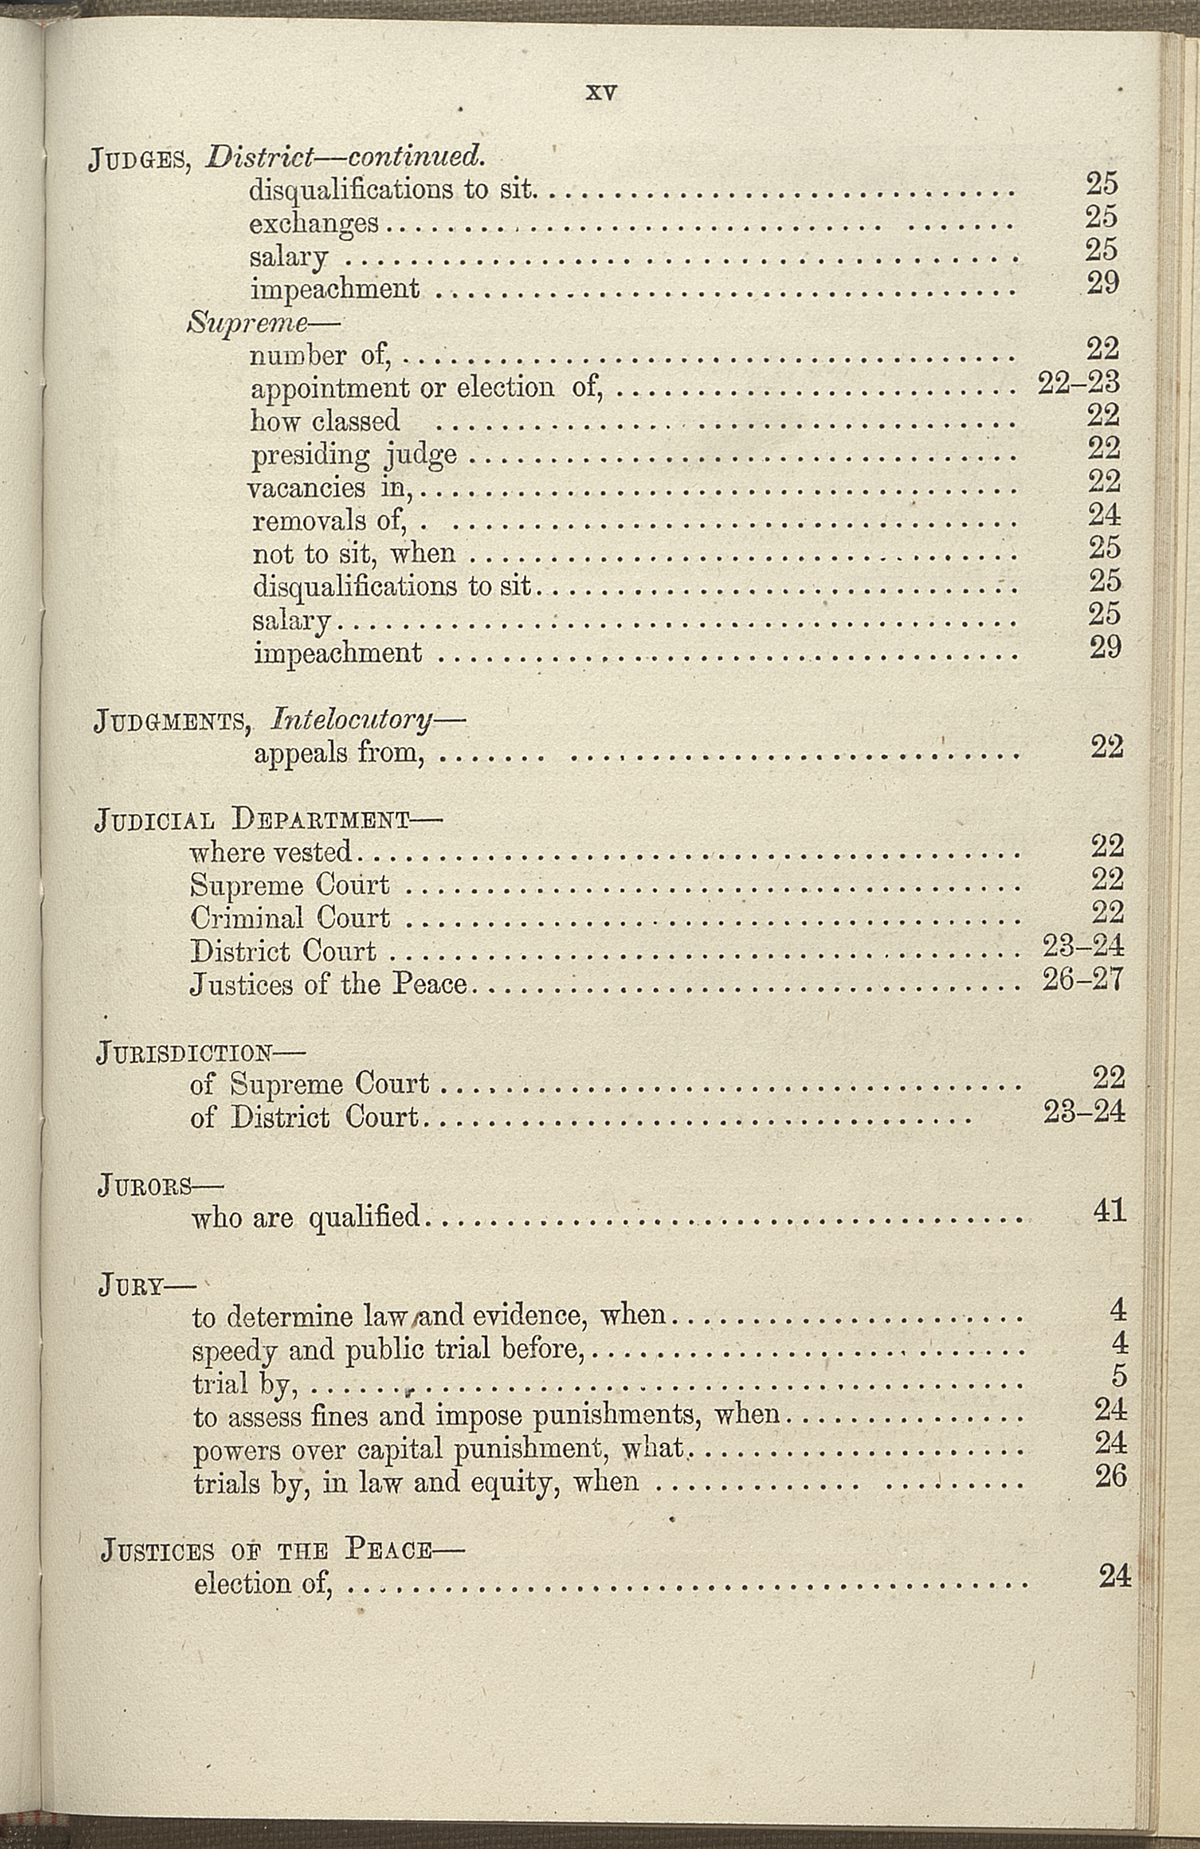 page 15 - 1869 index